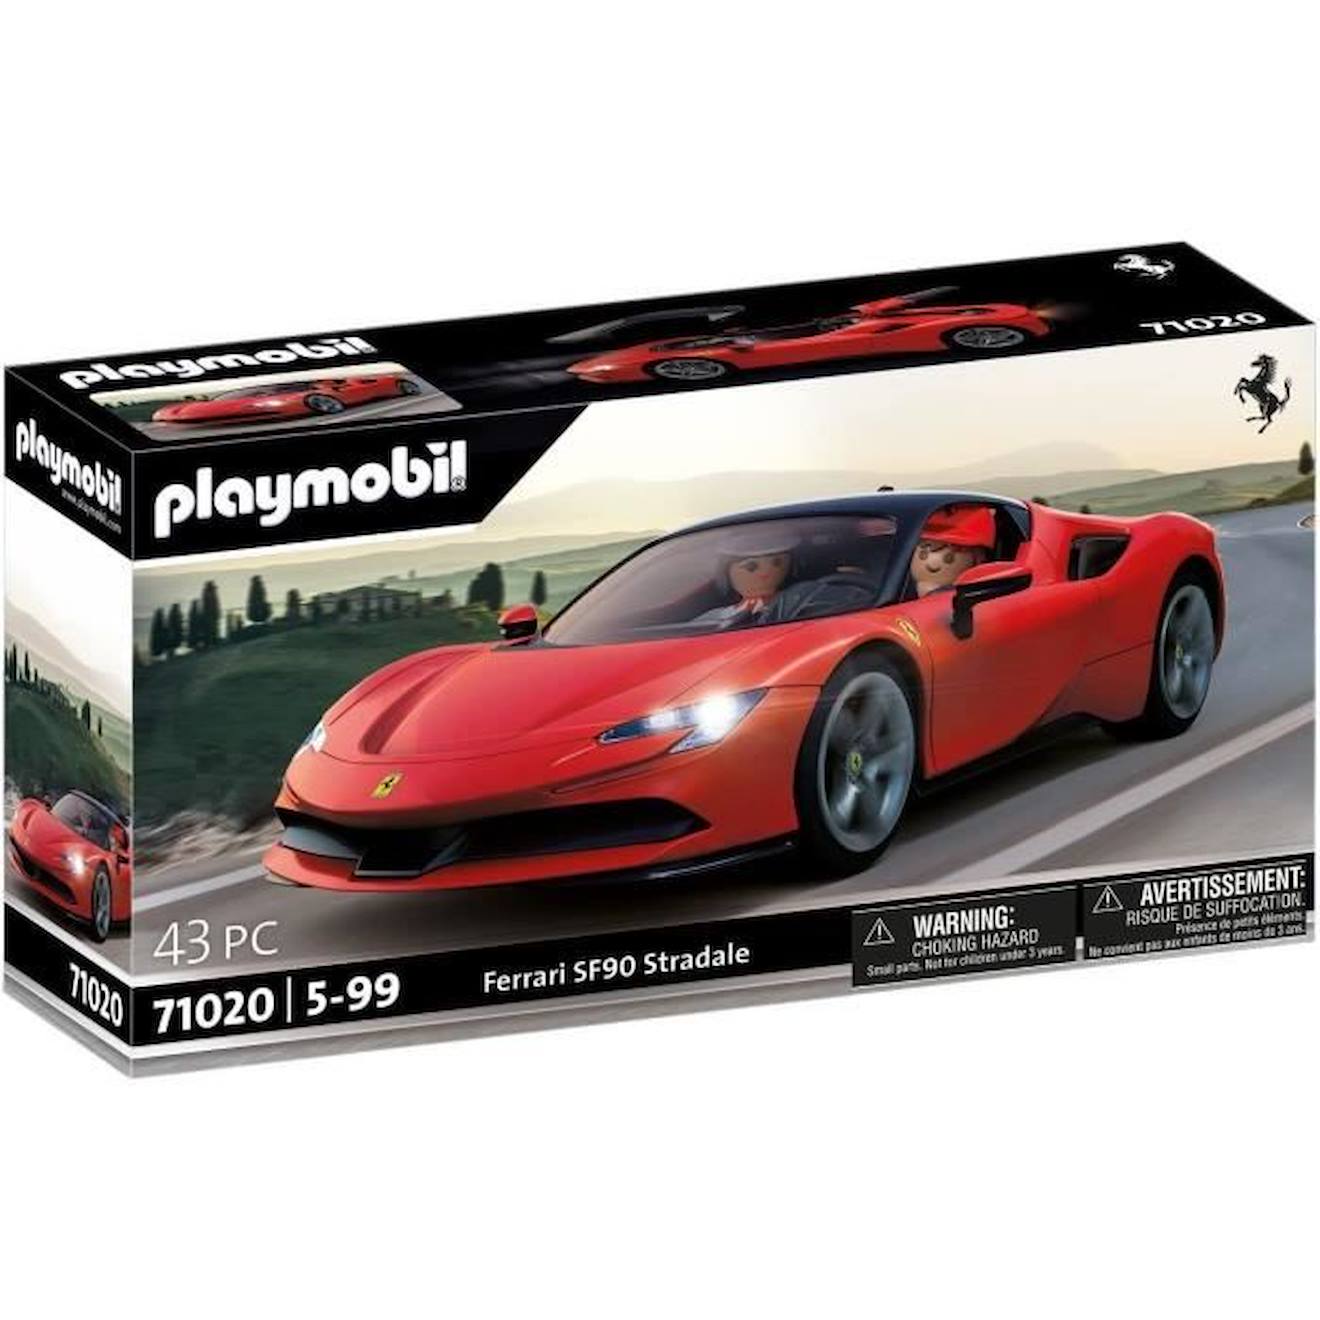 Playmobil - 71020 - Ferrari Sf90 Stradale - Classic Cars - Voiture De Collection Rouge